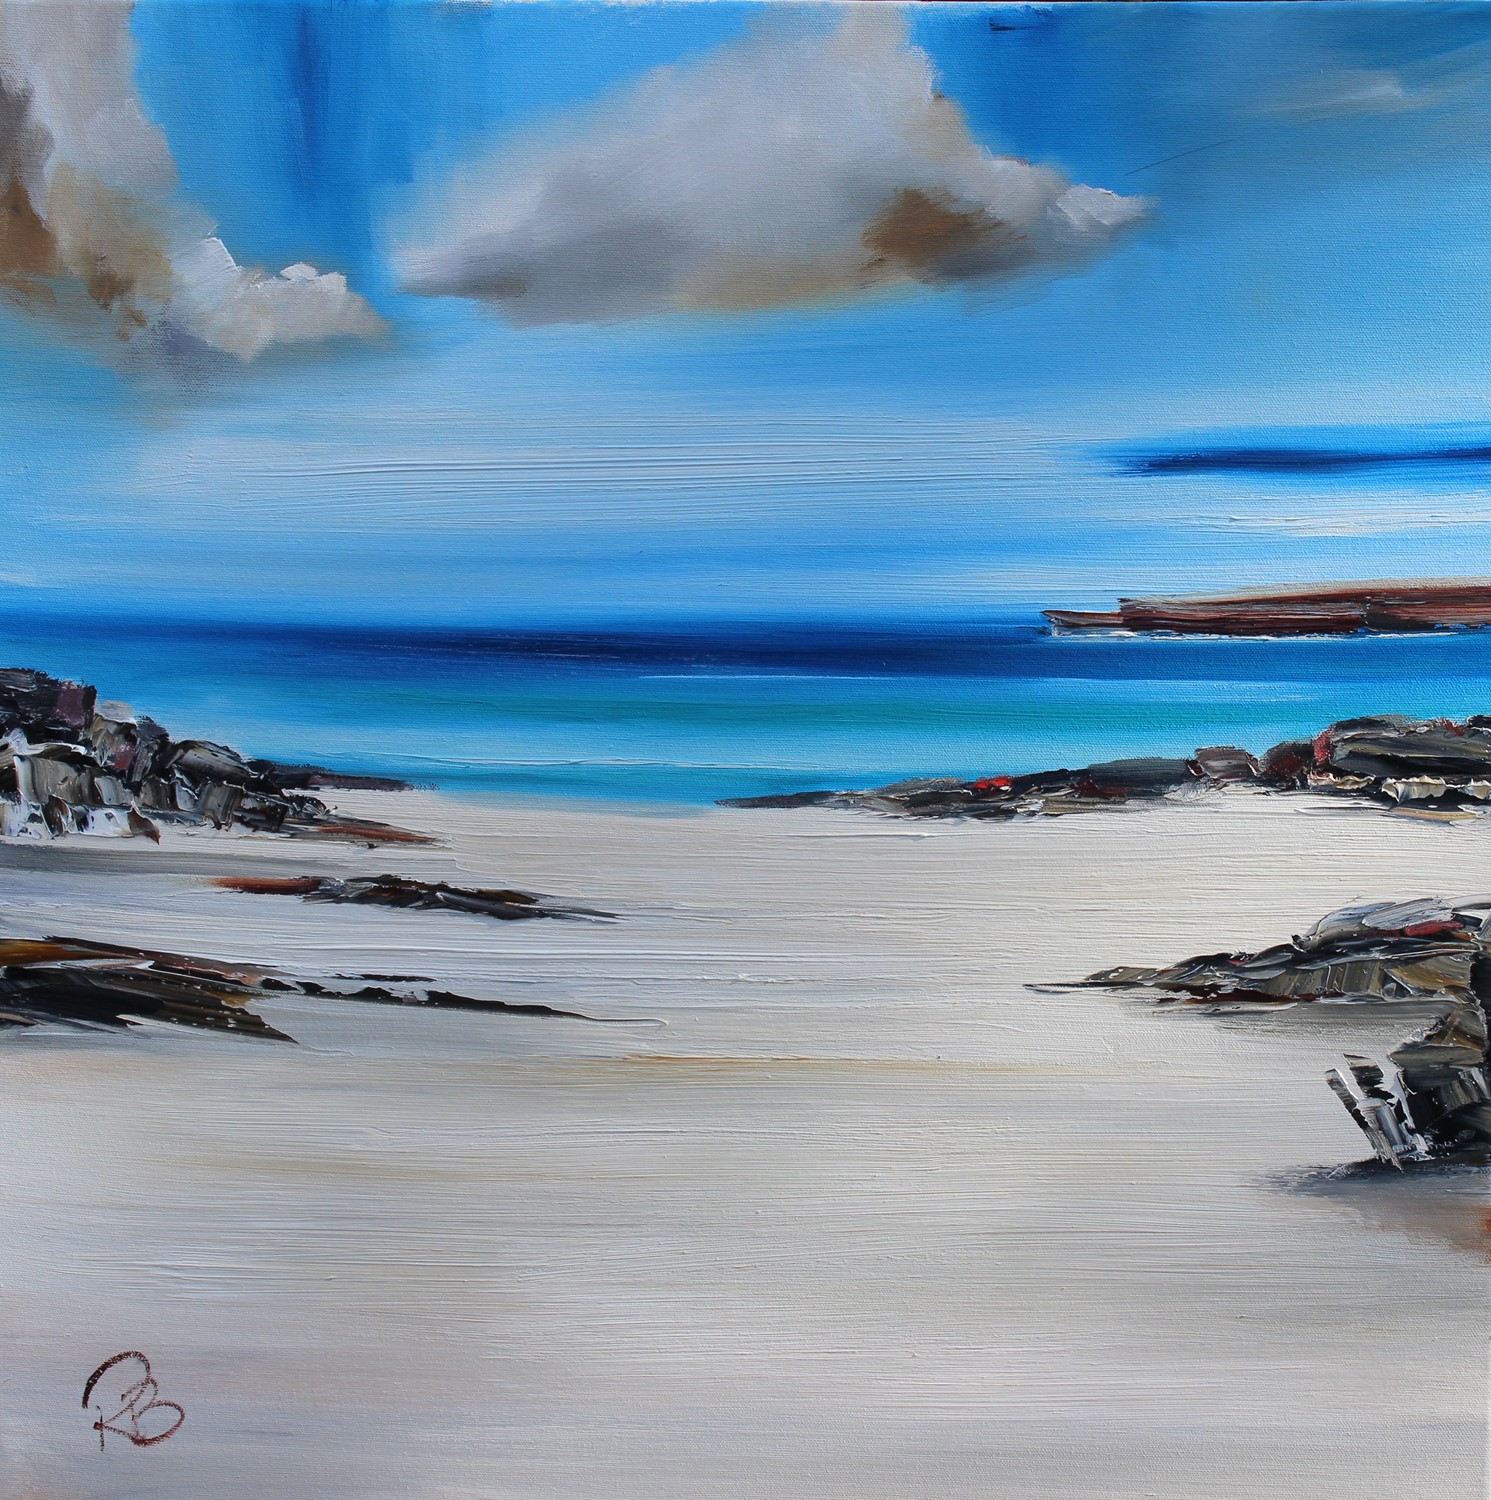 'Beached for the Day' by artist Rosanne Barr